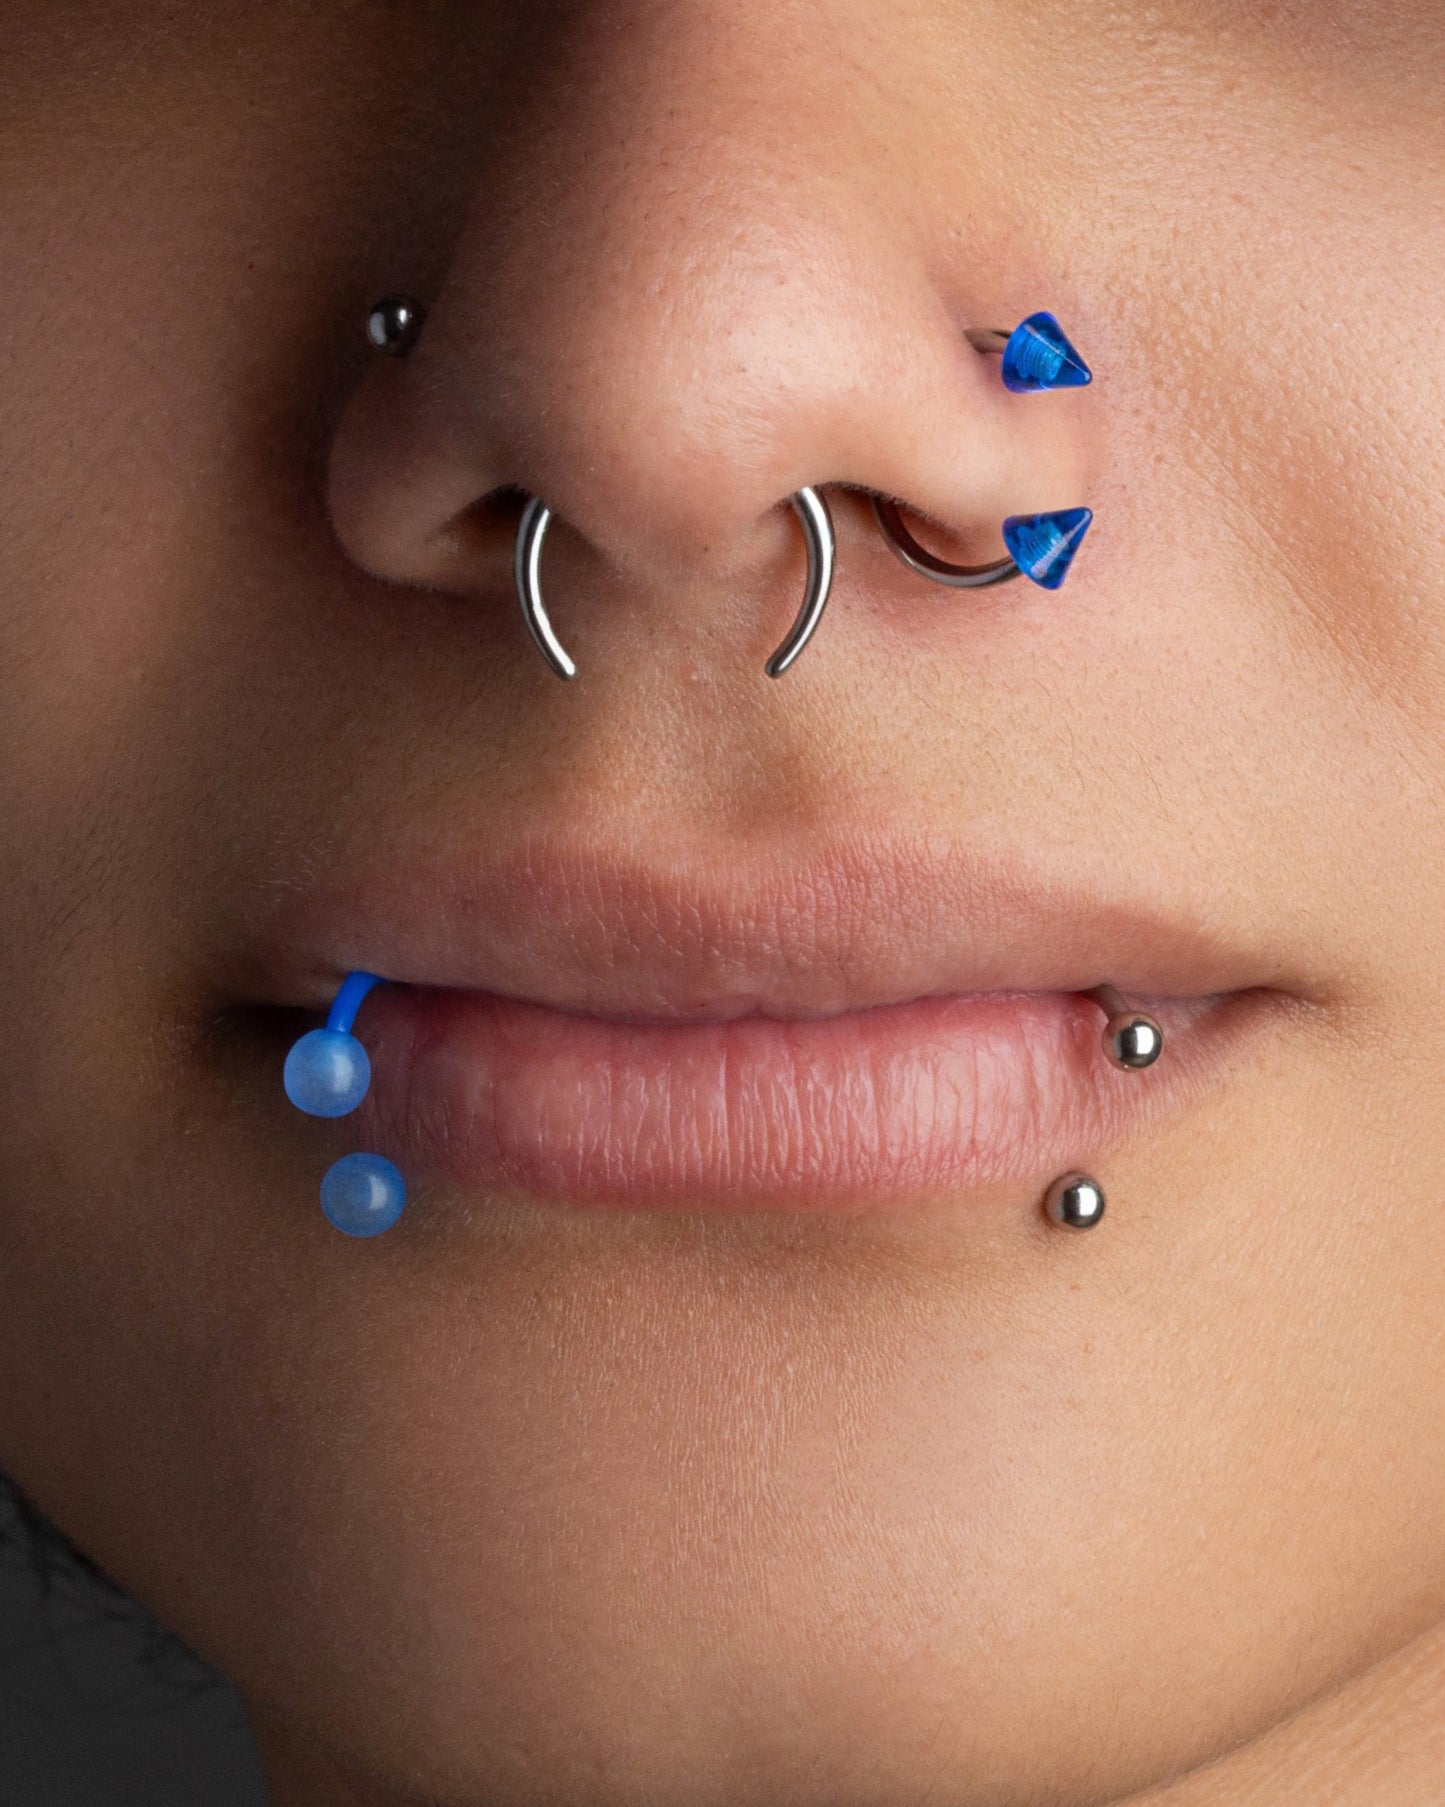 Septum Pincher Nose Ring with 2 Black O-Rings - Stainless Steel